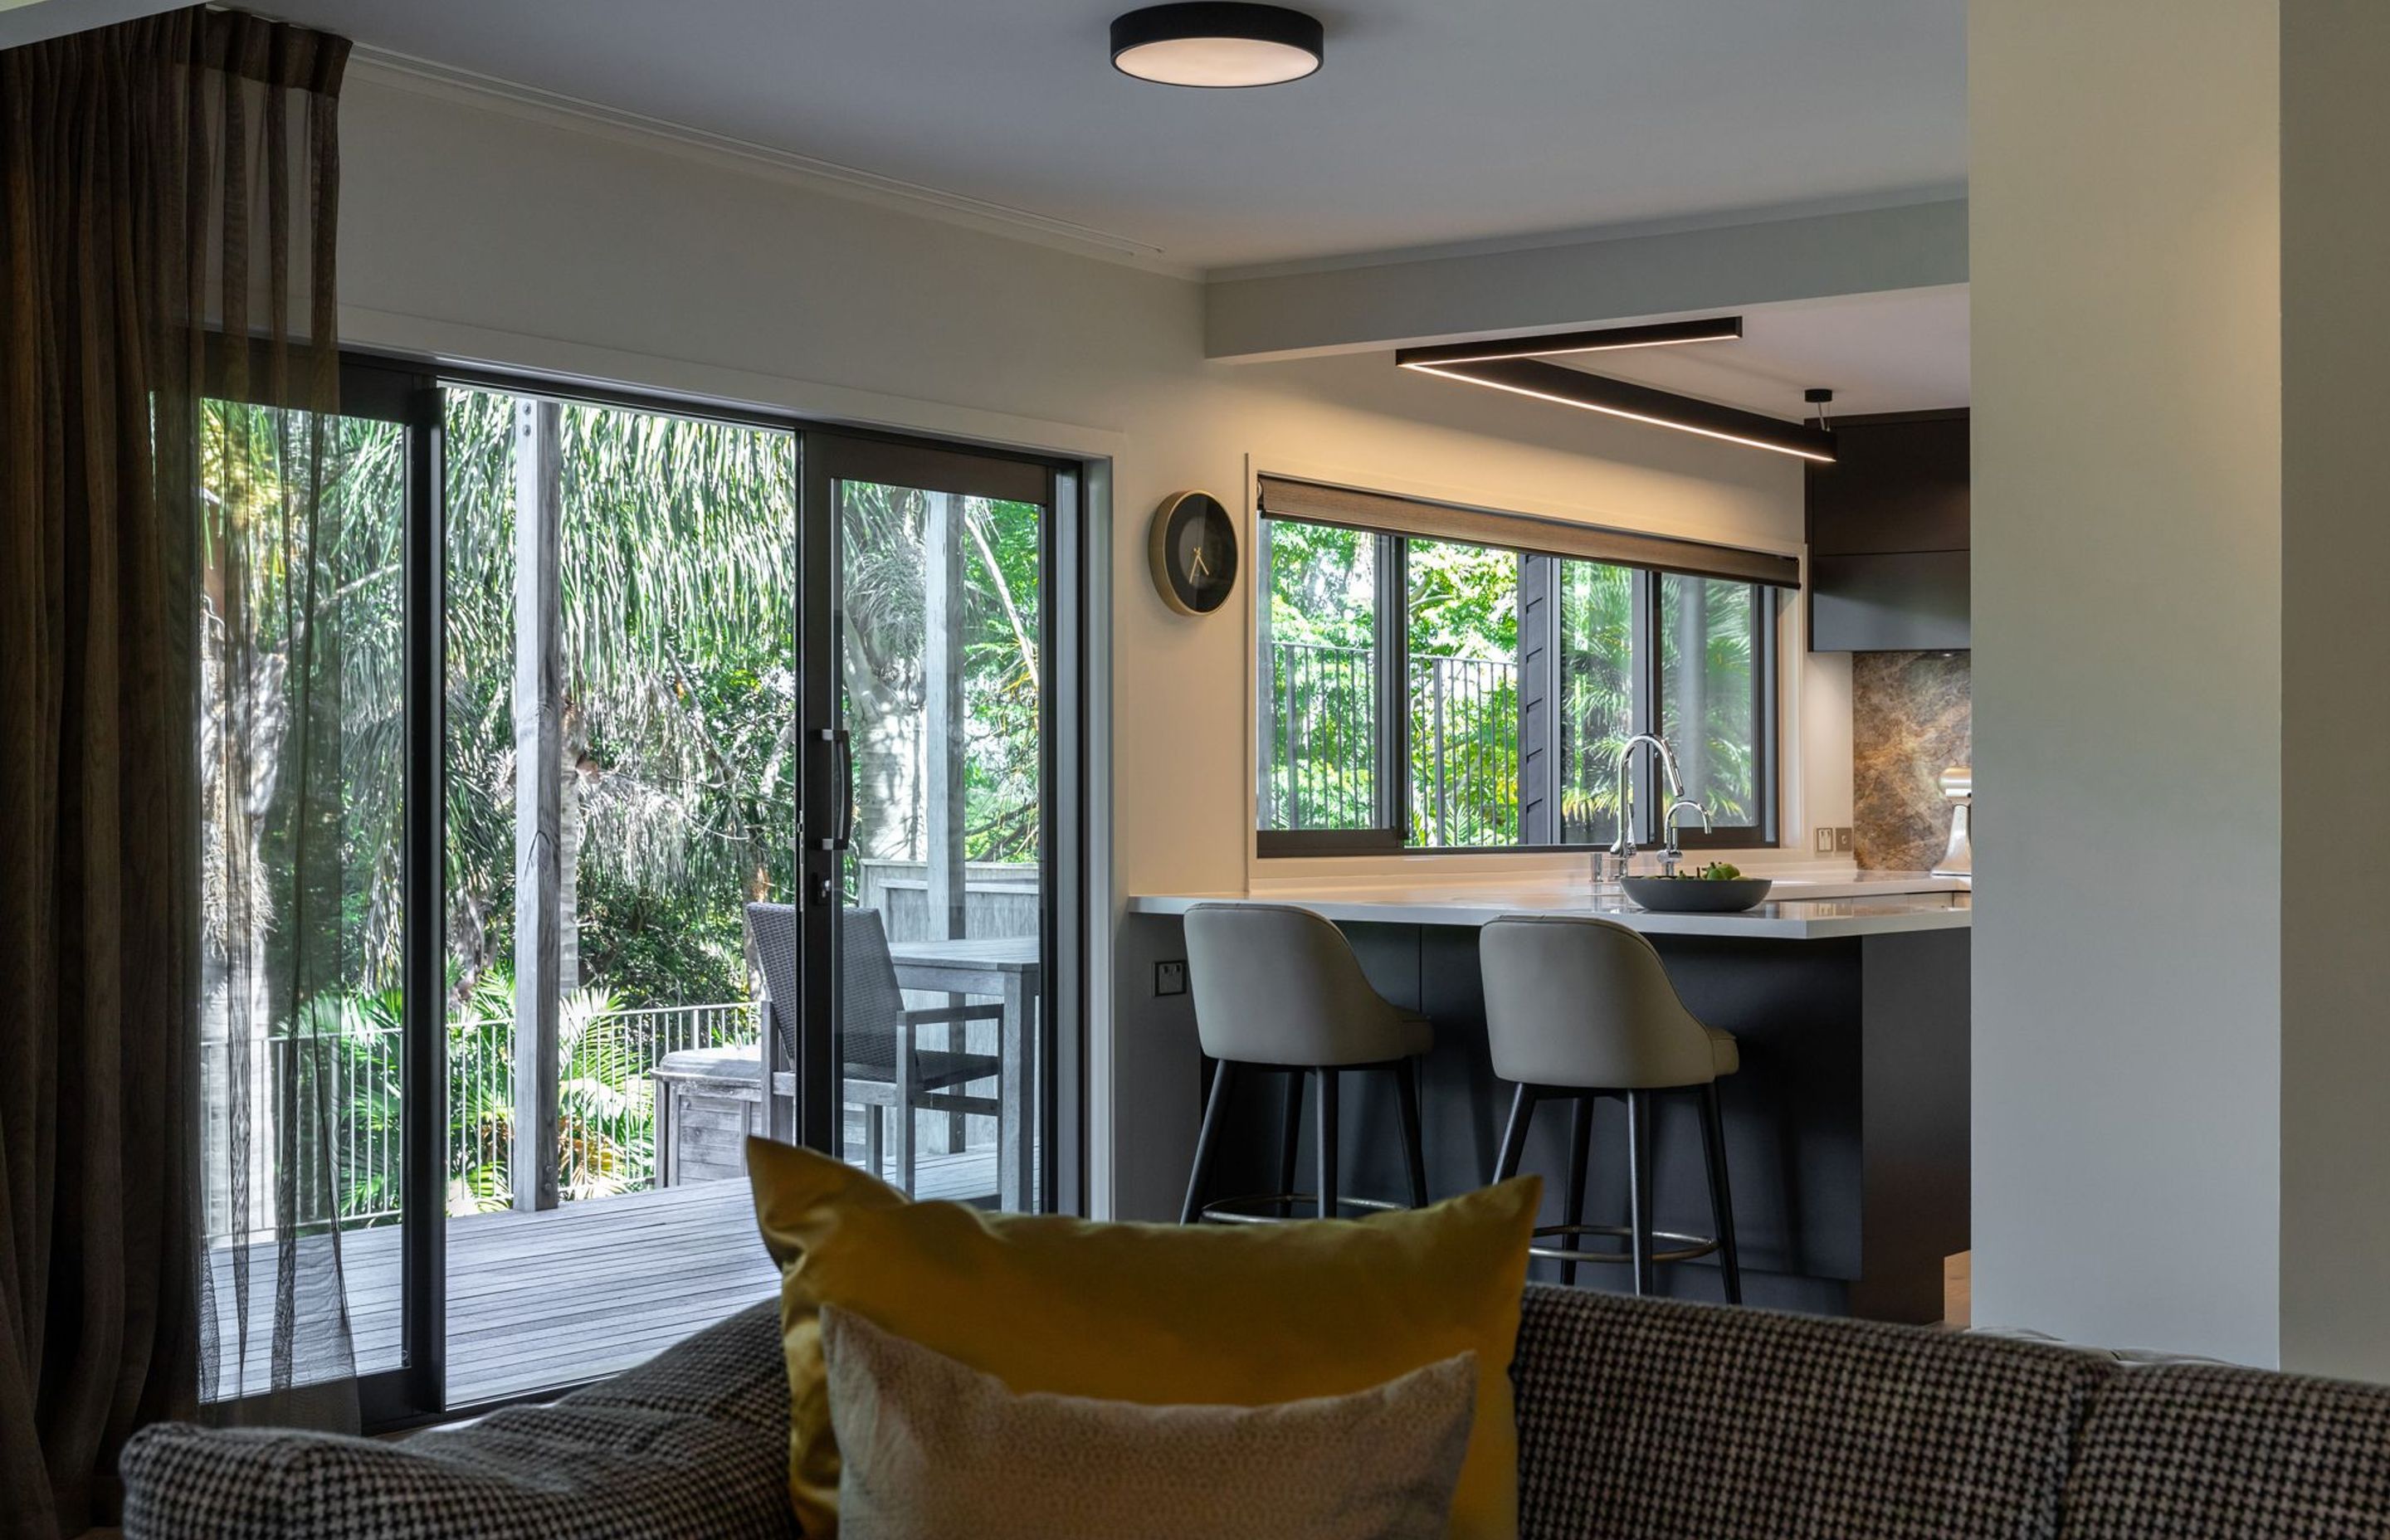 In unison with Donna White Interiors, we selected a coherent palette of golden highlights, deep nespresso and champagne hues, for a timeless curated result. The bush reserve provides a tranquil private outlook flowing seemlessly from the kitchen.